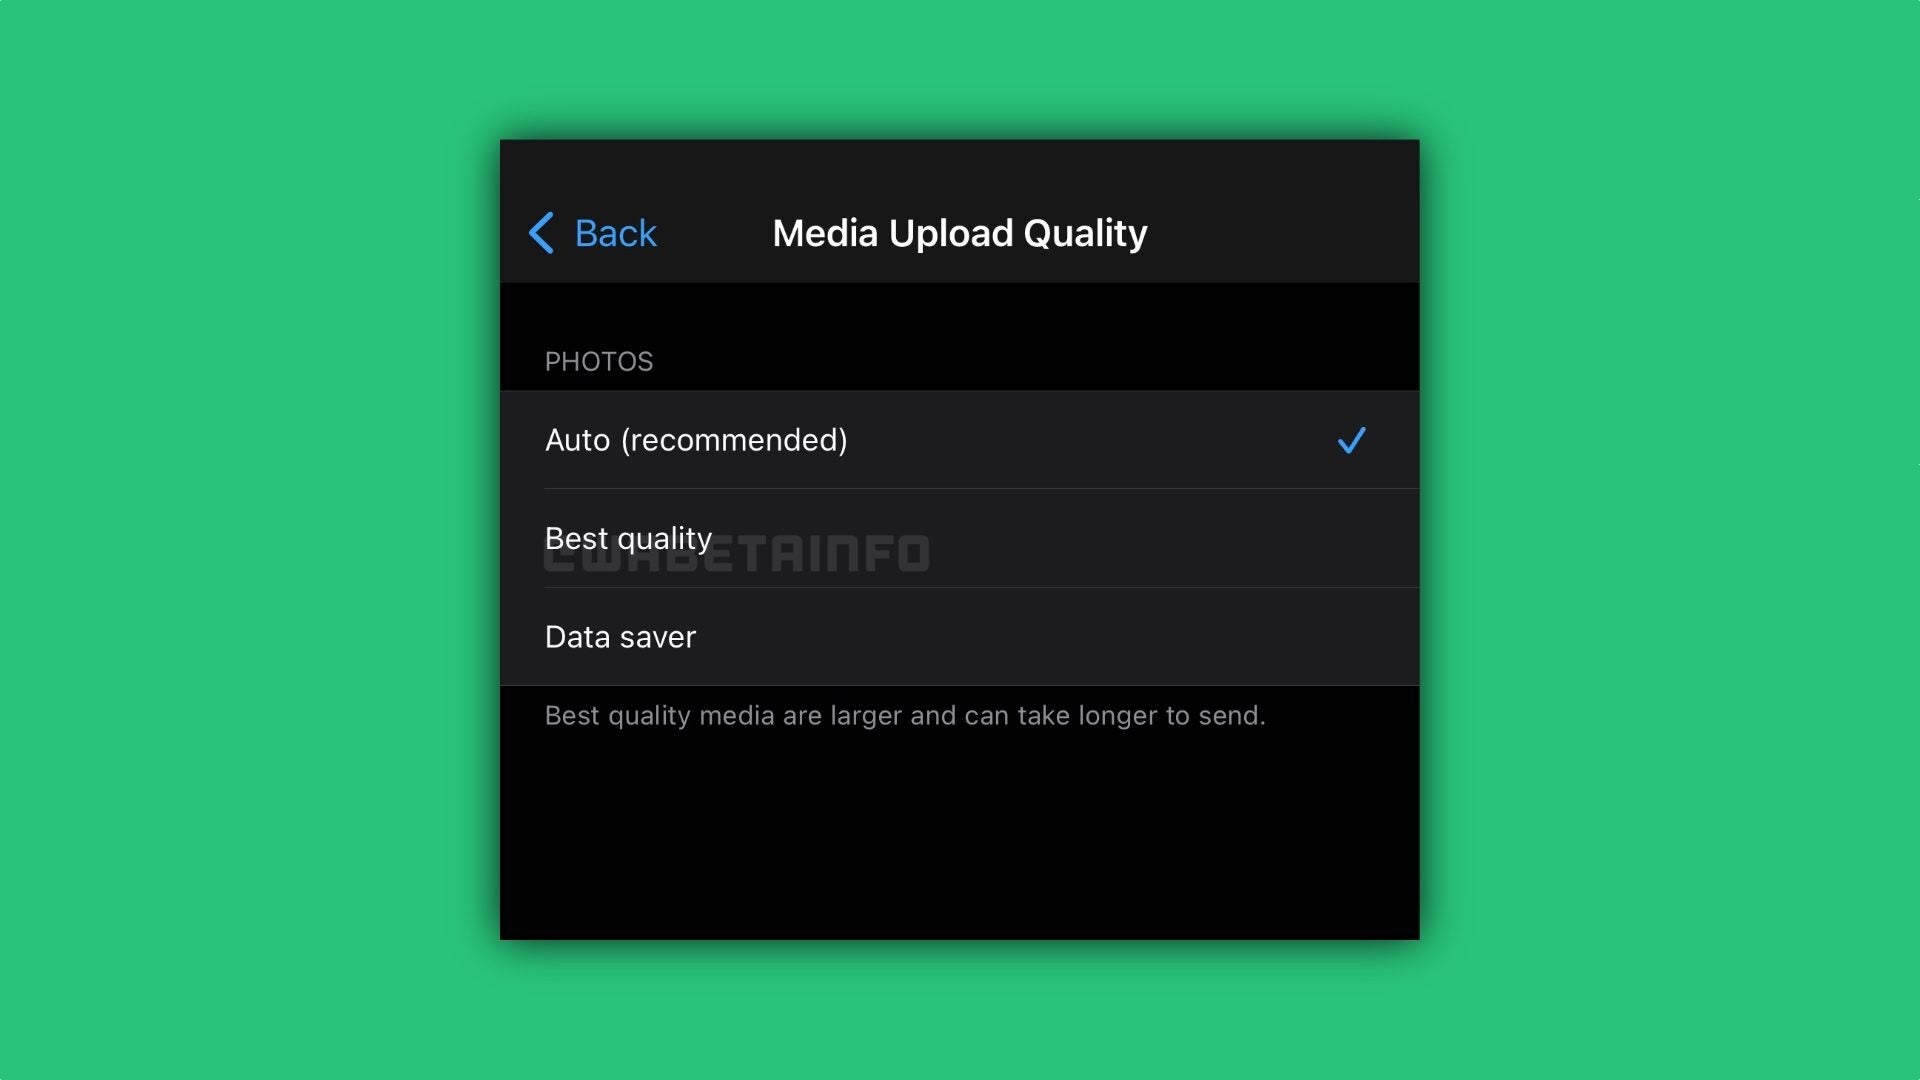 WhatsApp beta for iOS's new image quality options - WhatsApp beta for iOS introduces the option to send better quality images via the chat service